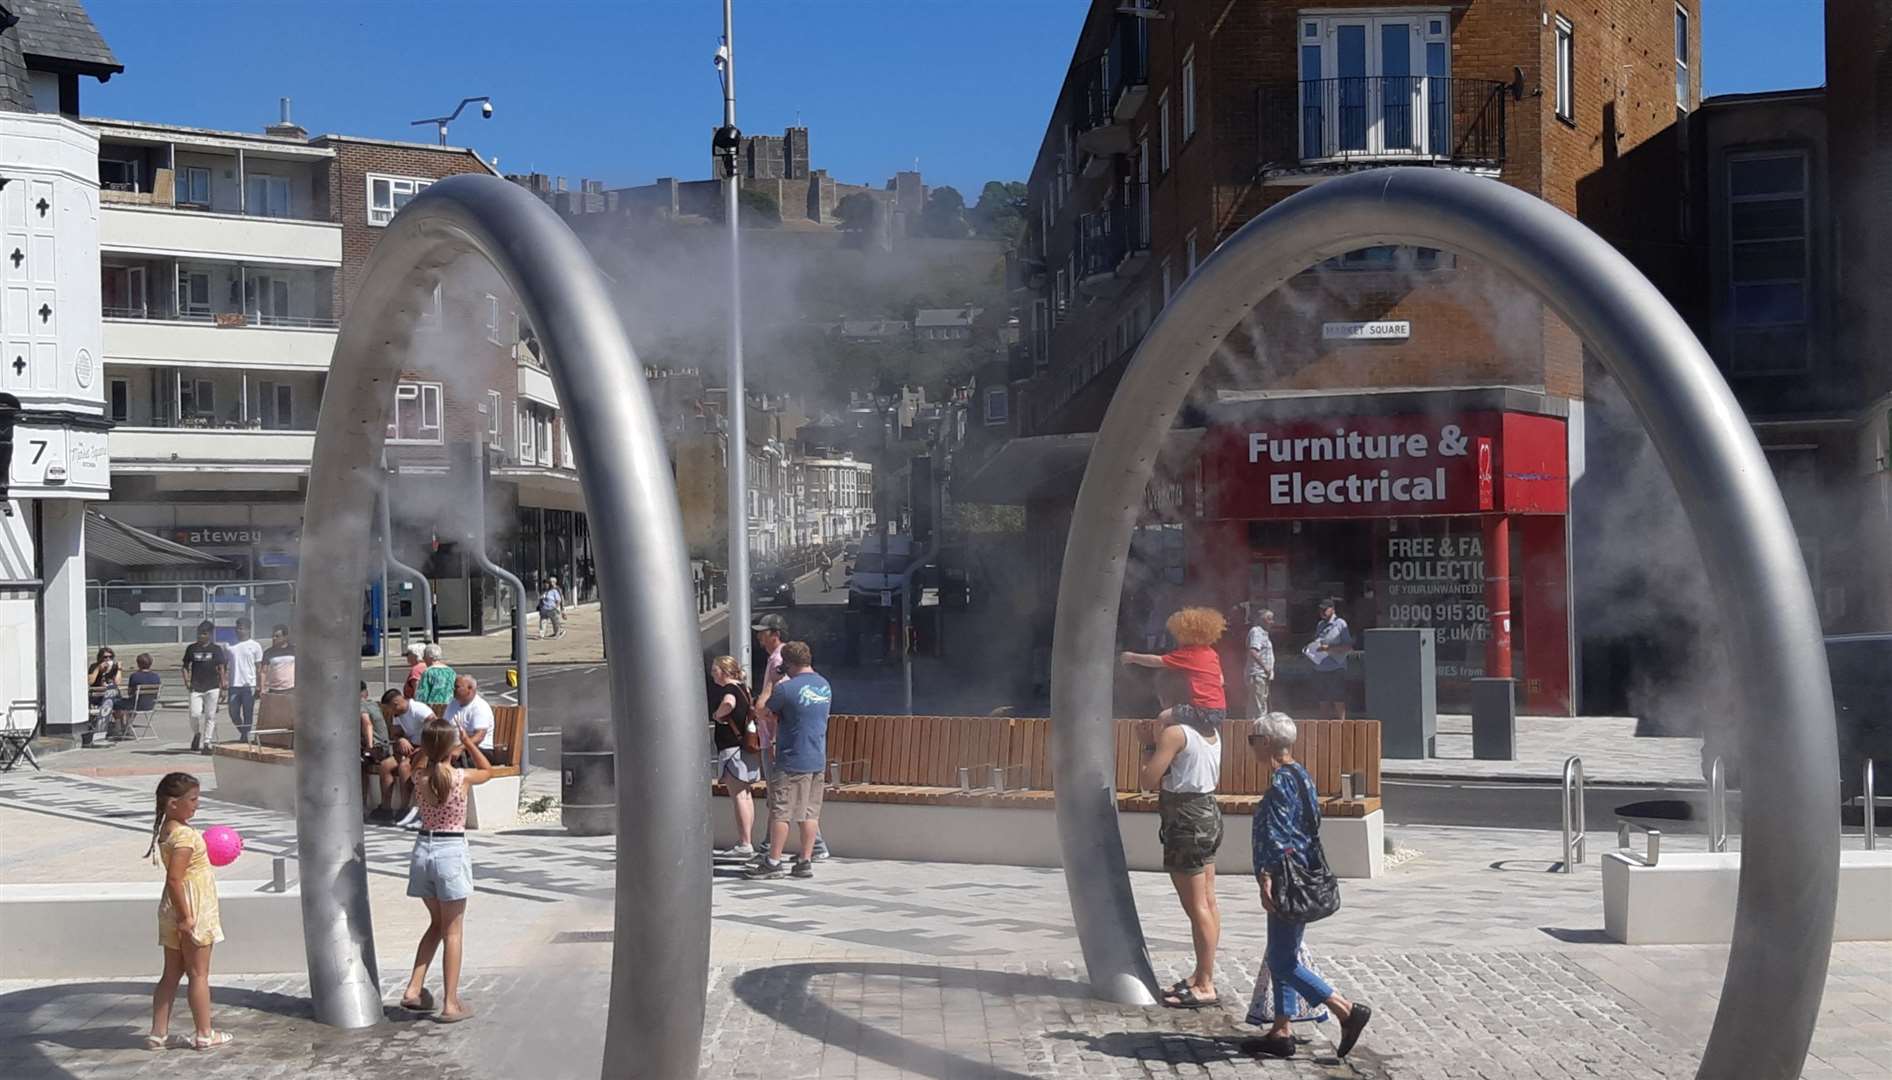 How the water feature in Market Square, Dover, was intended to be used. Picture: Sam Lennon